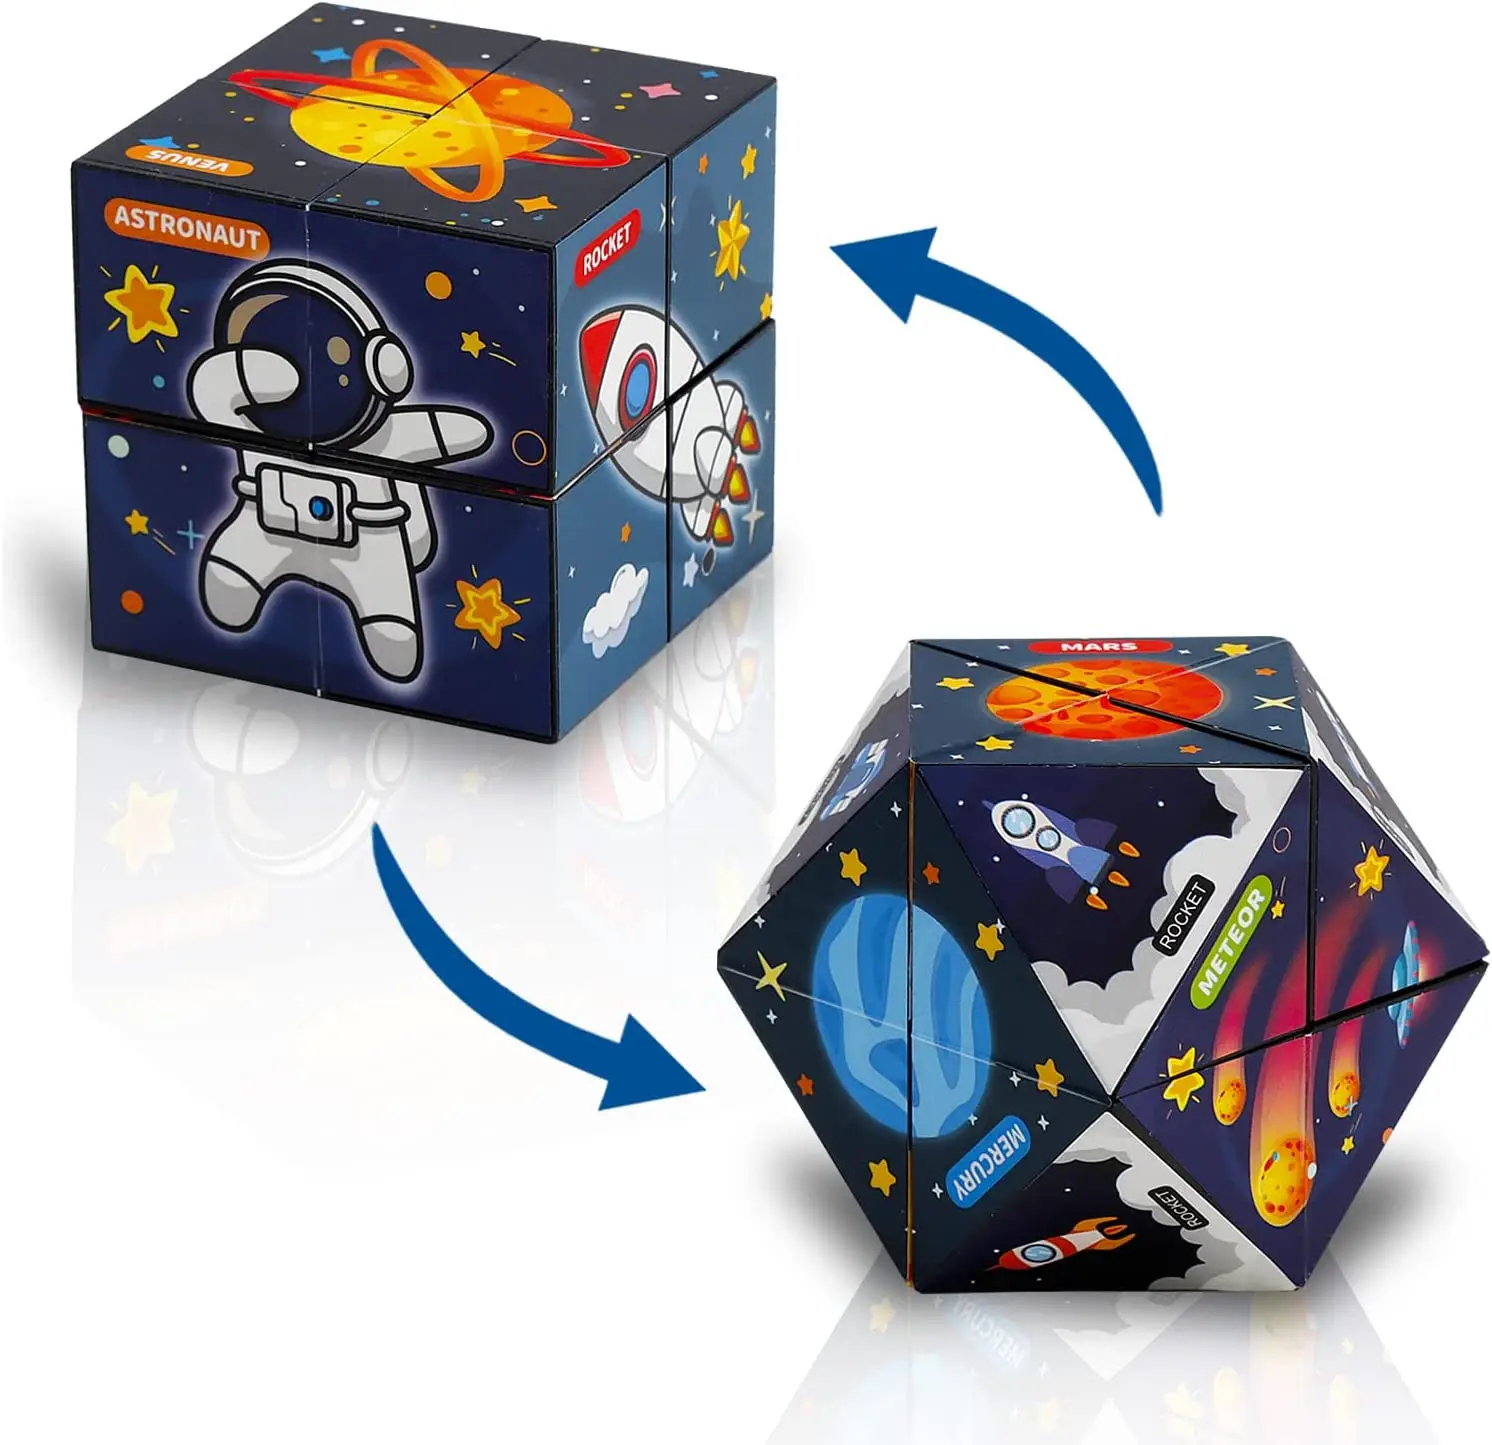 Magic Cube Fidget Toy, Star Cube Fidget Cube,Cool Mini Gadget for Stress Anxiety Relief and Kill Time Nice for Kids and Adults